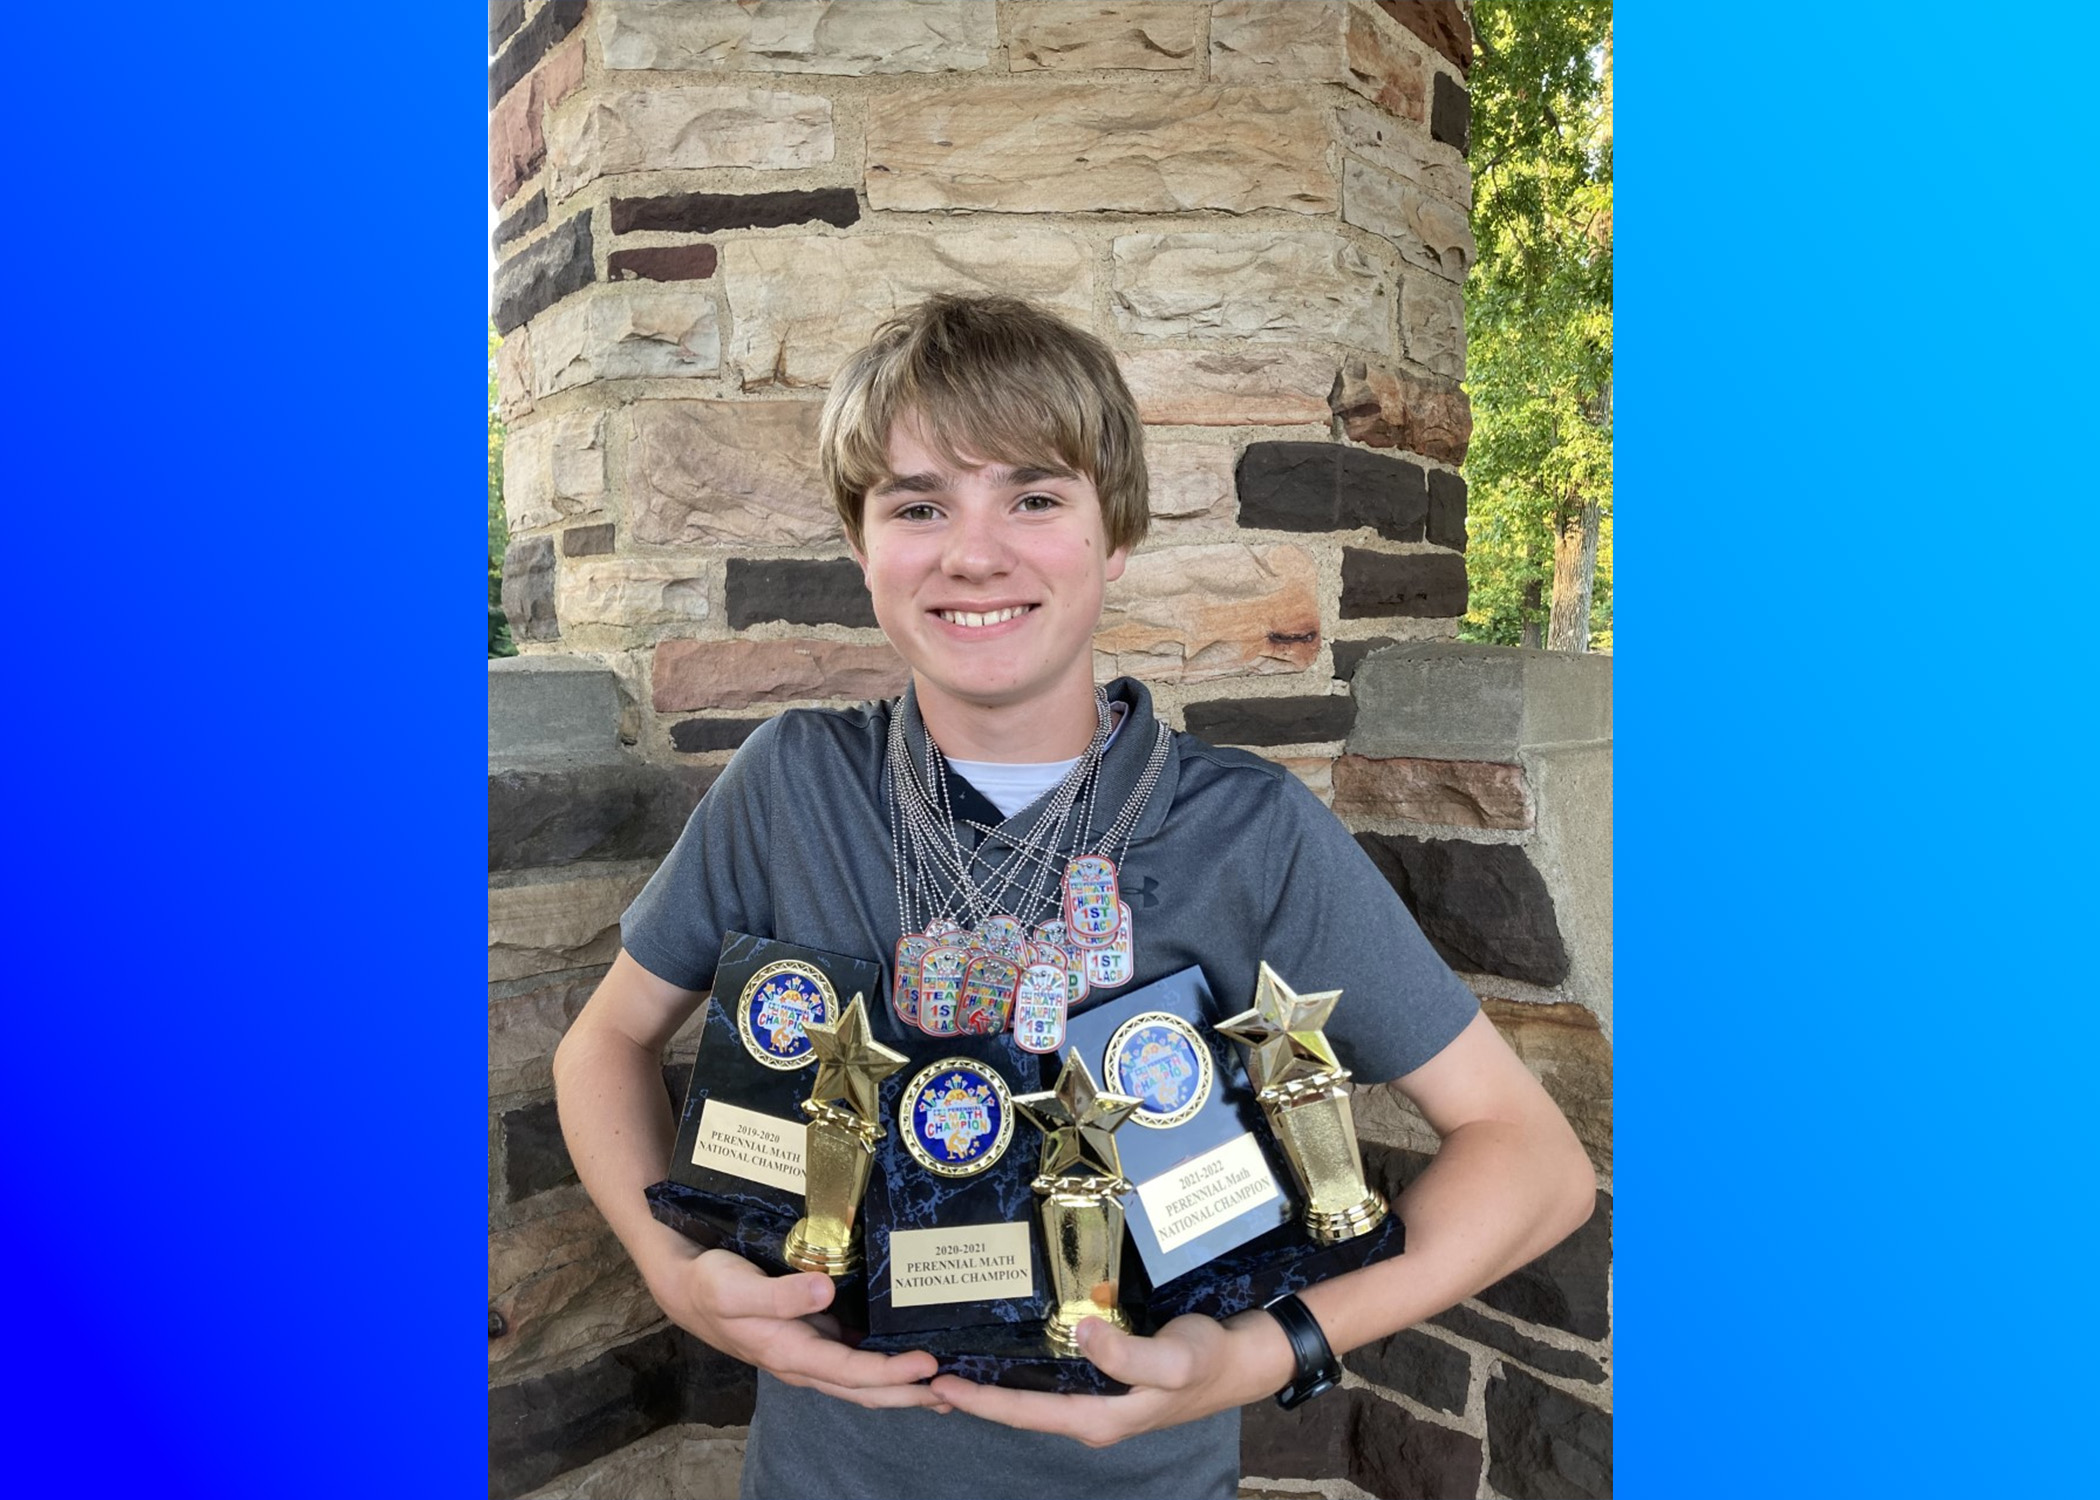 Trussville youth, three-time math national champion